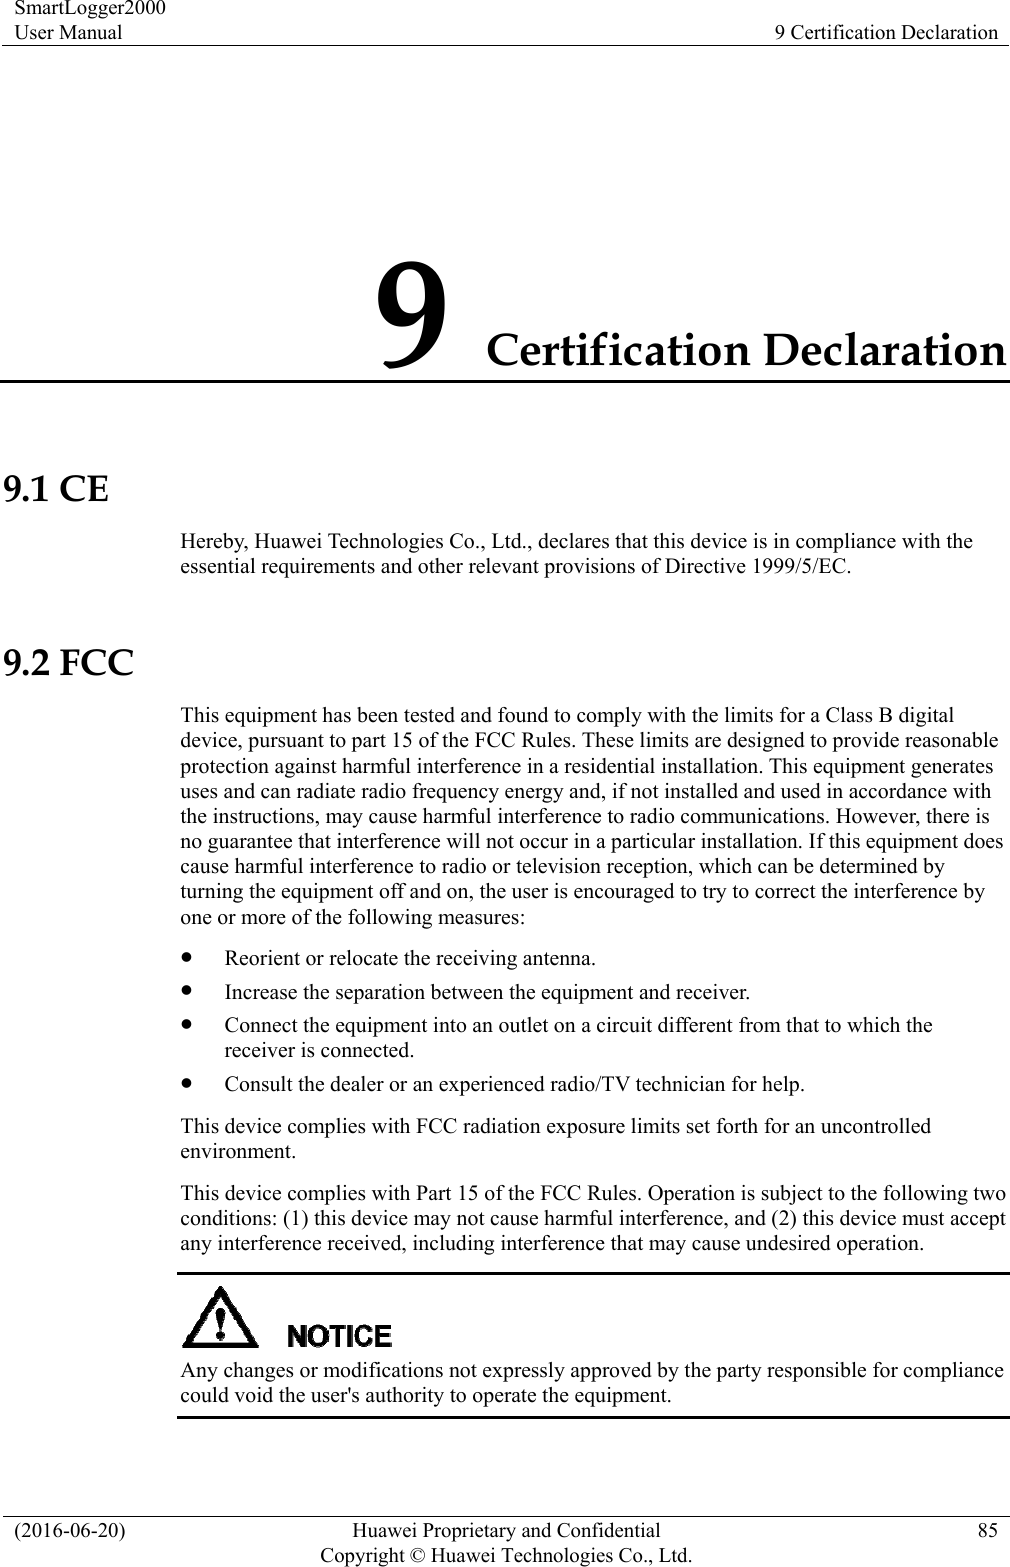 SmartLogger2000 User Manual  9 Certification Declaration (2016-06-20)  Huawei Proprietary and Confidential         Copyright © Huawei Technologies Co., Ltd.85 9 Certification Declaration 9.1 CE Hereby, Huawei Technologies Co., Ltd., declares that this device is in compliance with the essential requirements and other relevant provisions of Directive 1999/5/EC.  9.2 FCC This equipment has been tested and found to comply with the limits for a Class B digital device, pursuant to part 15 of the FCC Rules. These limits are designed to provide reasonable protection against harmful interference in a residential installation. This equipment generates uses and can radiate radio frequency energy and, if not installed and used in accordance with the instructions, may cause harmful interference to radio communications. However, there is no guarantee that interference will not occur in a particular installation. If this equipment does cause harmful interference to radio or television reception, which can be determined by turning the equipment off and on, the user is encouraged to try to correct the interference by one or more of the following measures:    Reorient or relocate the receiving antenna.    Increase the separation between the equipment and receiver.    Connect the equipment into an outlet on a circuit different from that to which the receiver is connected.    Consult the dealer or an experienced radio/TV technician for help.   This device complies with FCC radiation exposure limits set forth for an uncontrolled environment.  This device complies with Part 15 of the FCC Rules. Operation is subject to the following two conditions: (1) this device may not cause harmful interference, and (2) this device must accept any interference received, including interference that may cause undesired operation.    Any changes or modifications not expressly approved by the party responsible for compliance could void the user&apos;s authority to operate the equipment.    